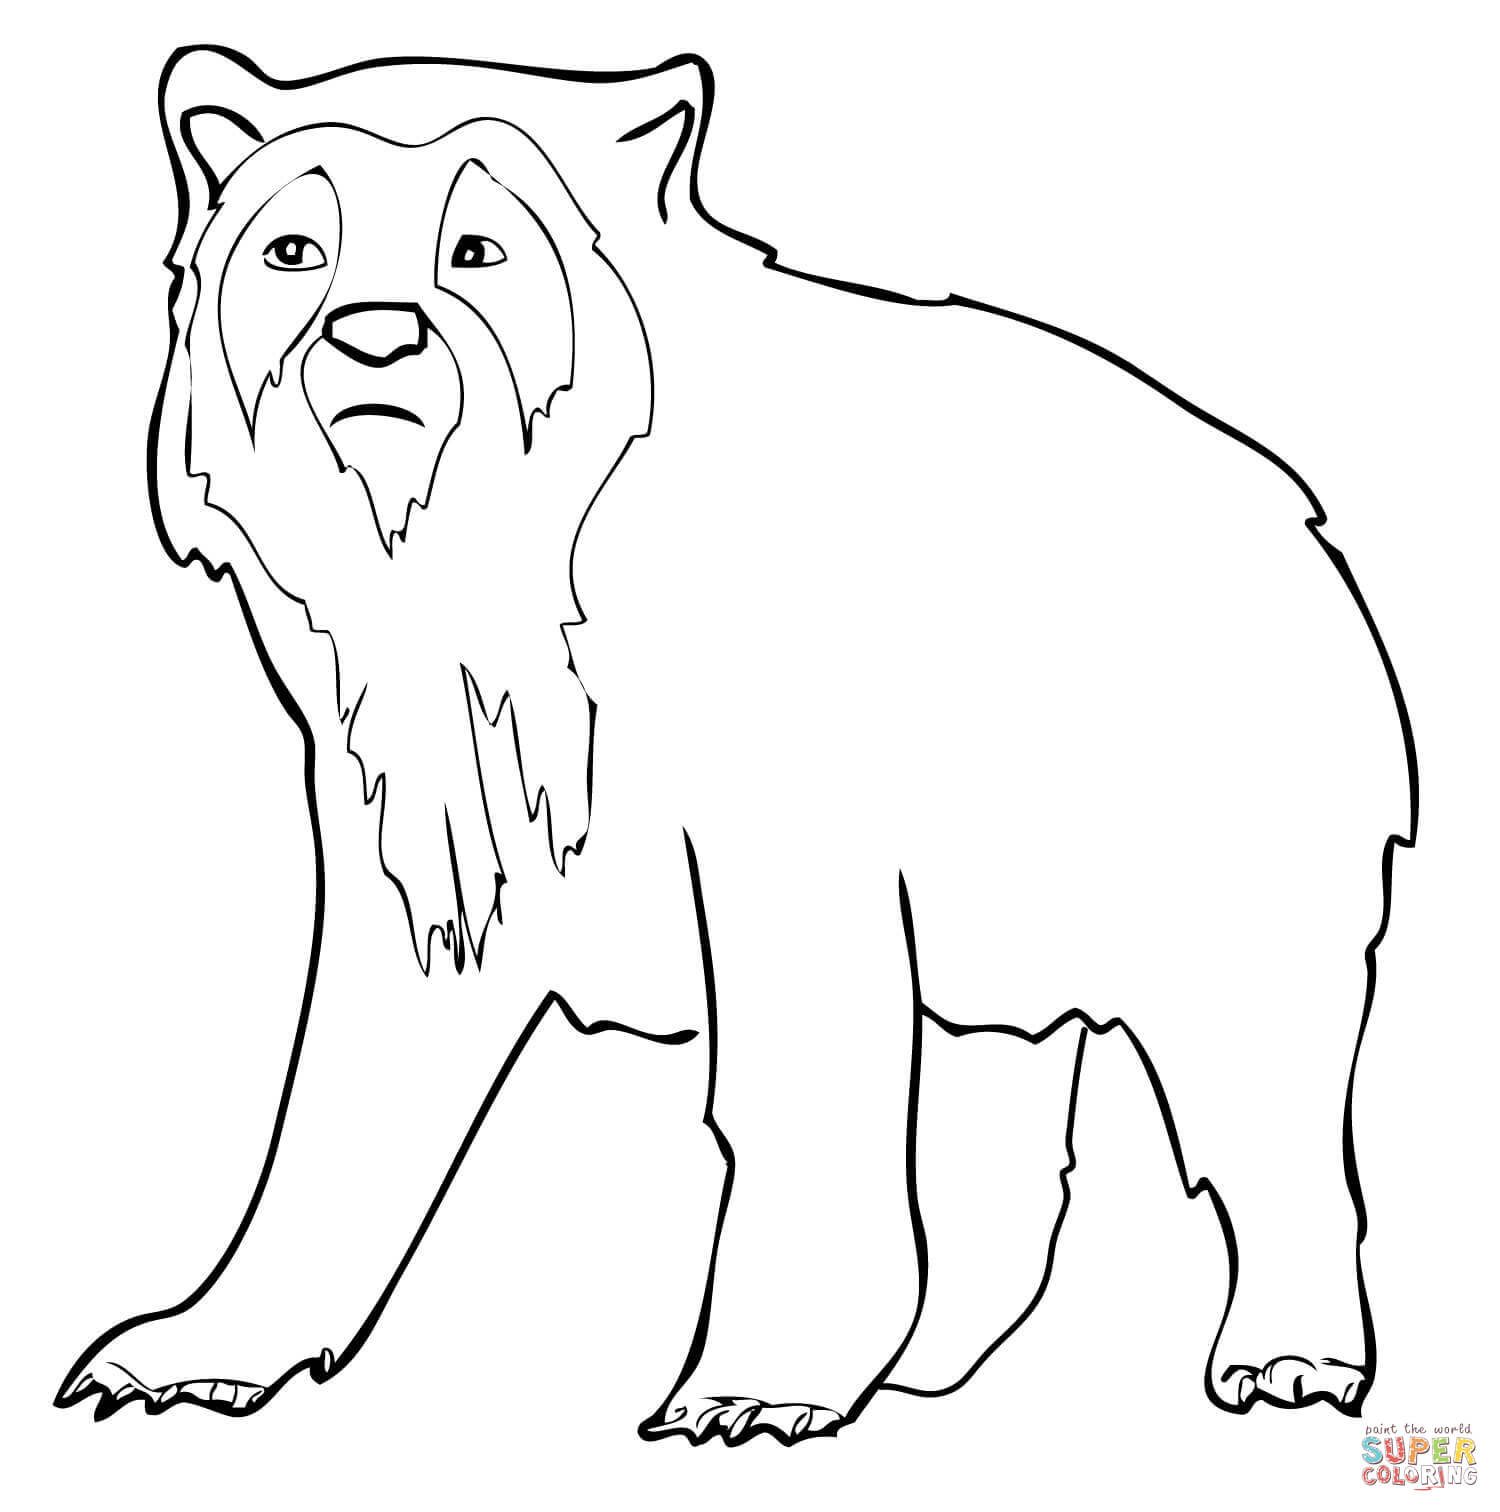 Spectacled Bear coloring #12, Download drawings